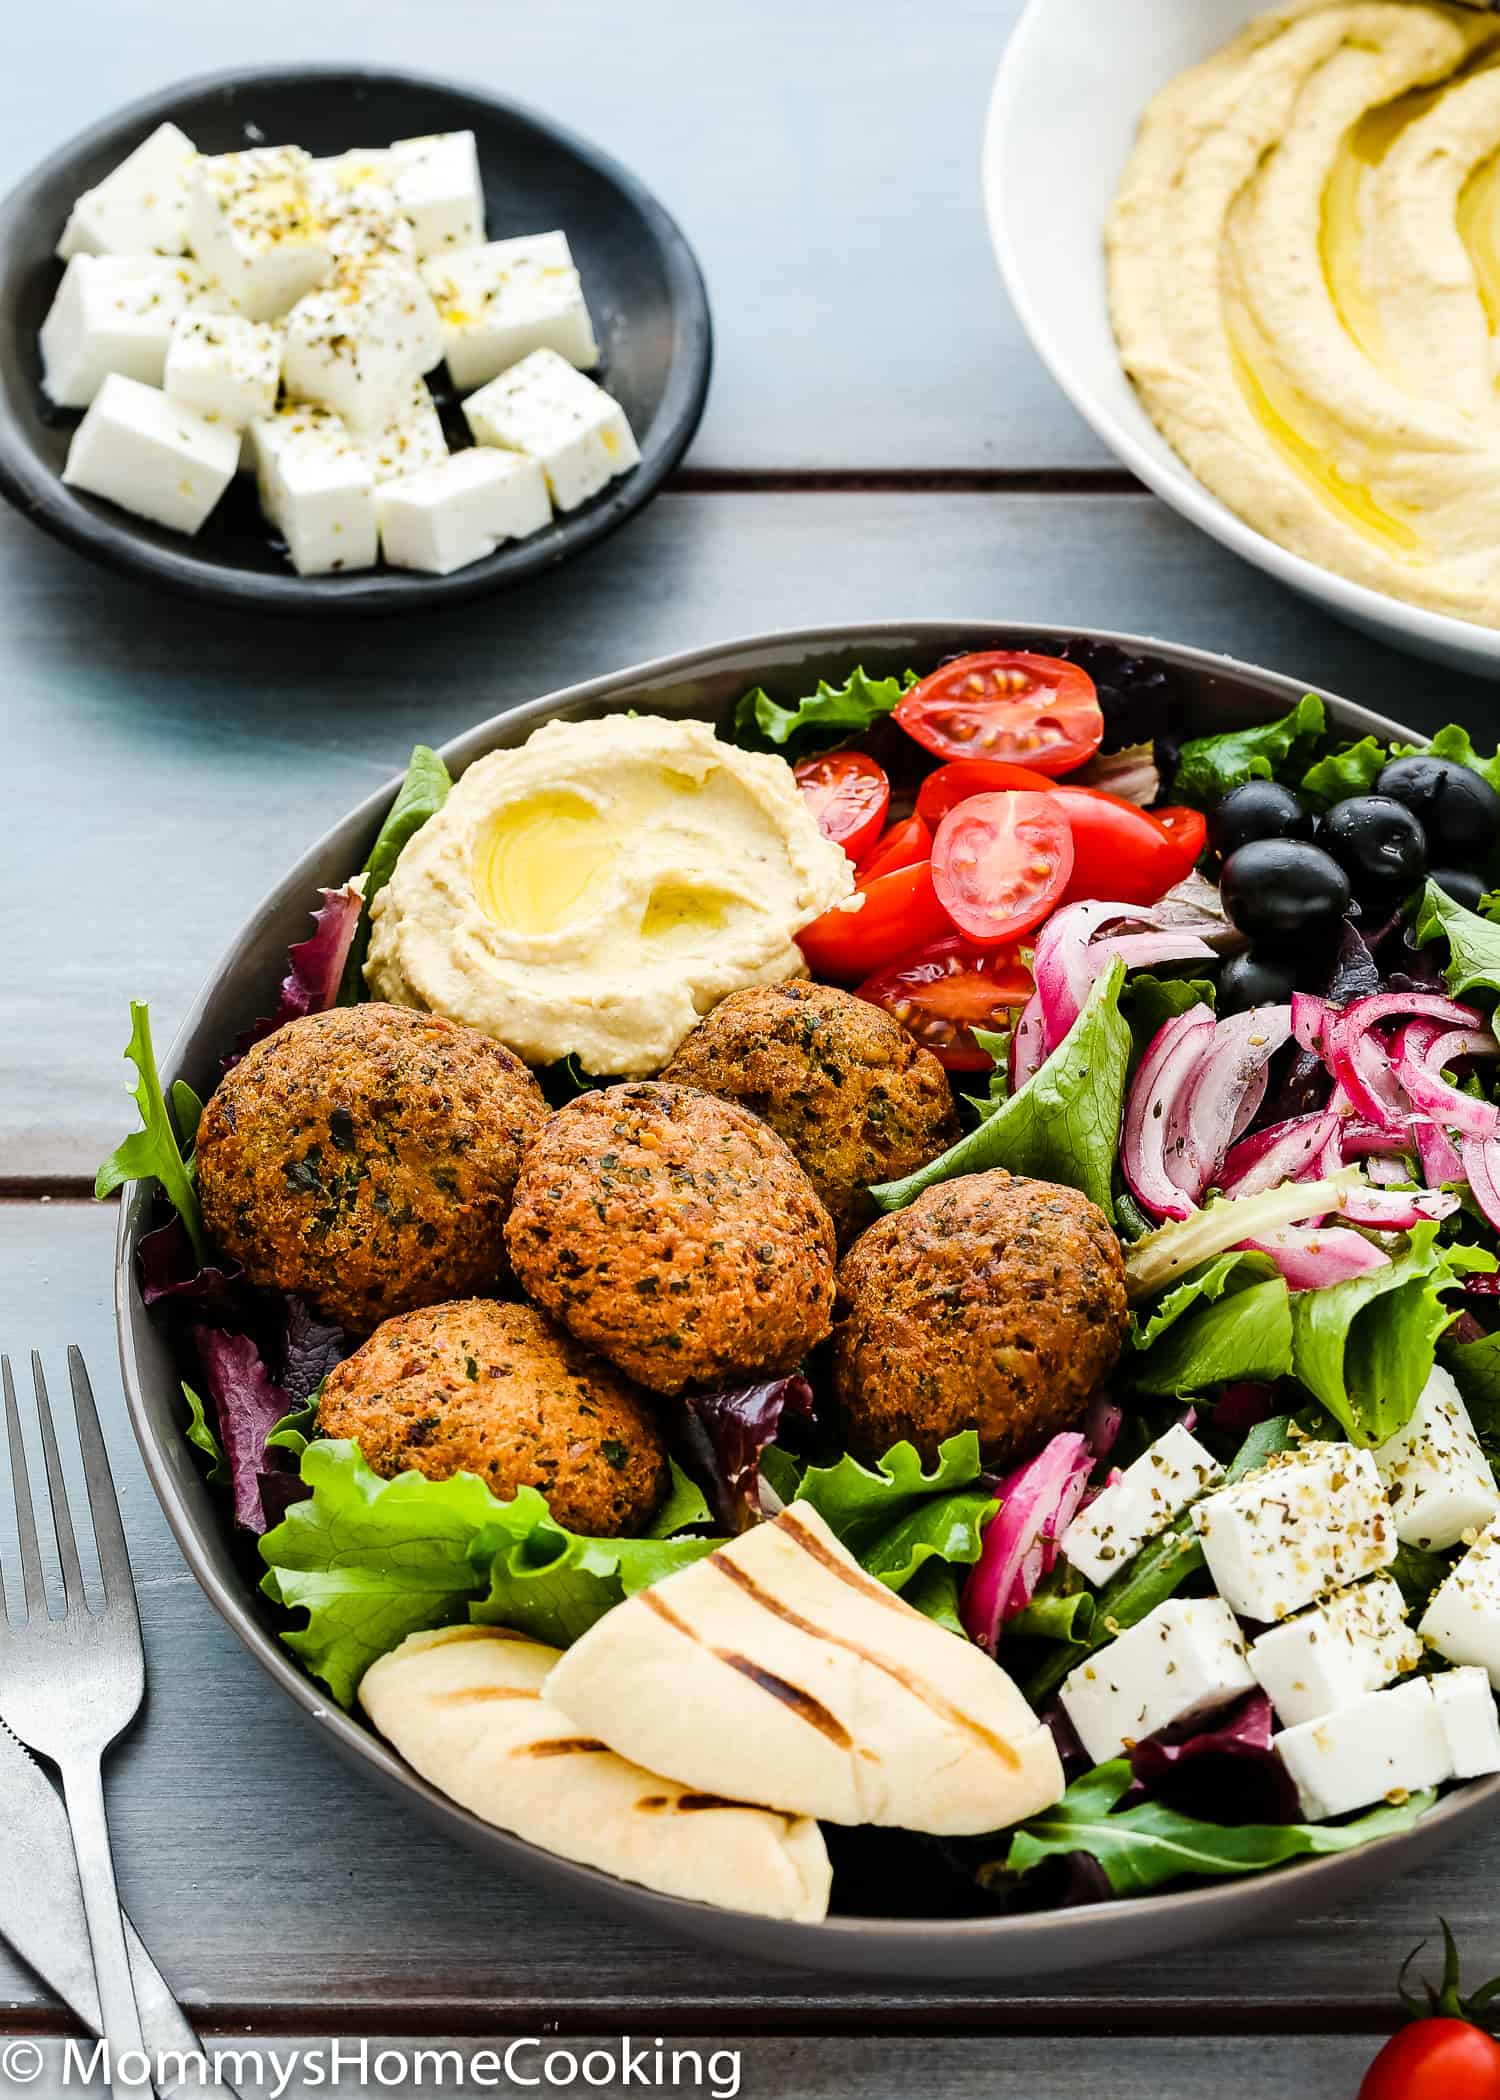 Falafel Salad Bowls with Mustard Hummus and cubed feta cheese in the background.